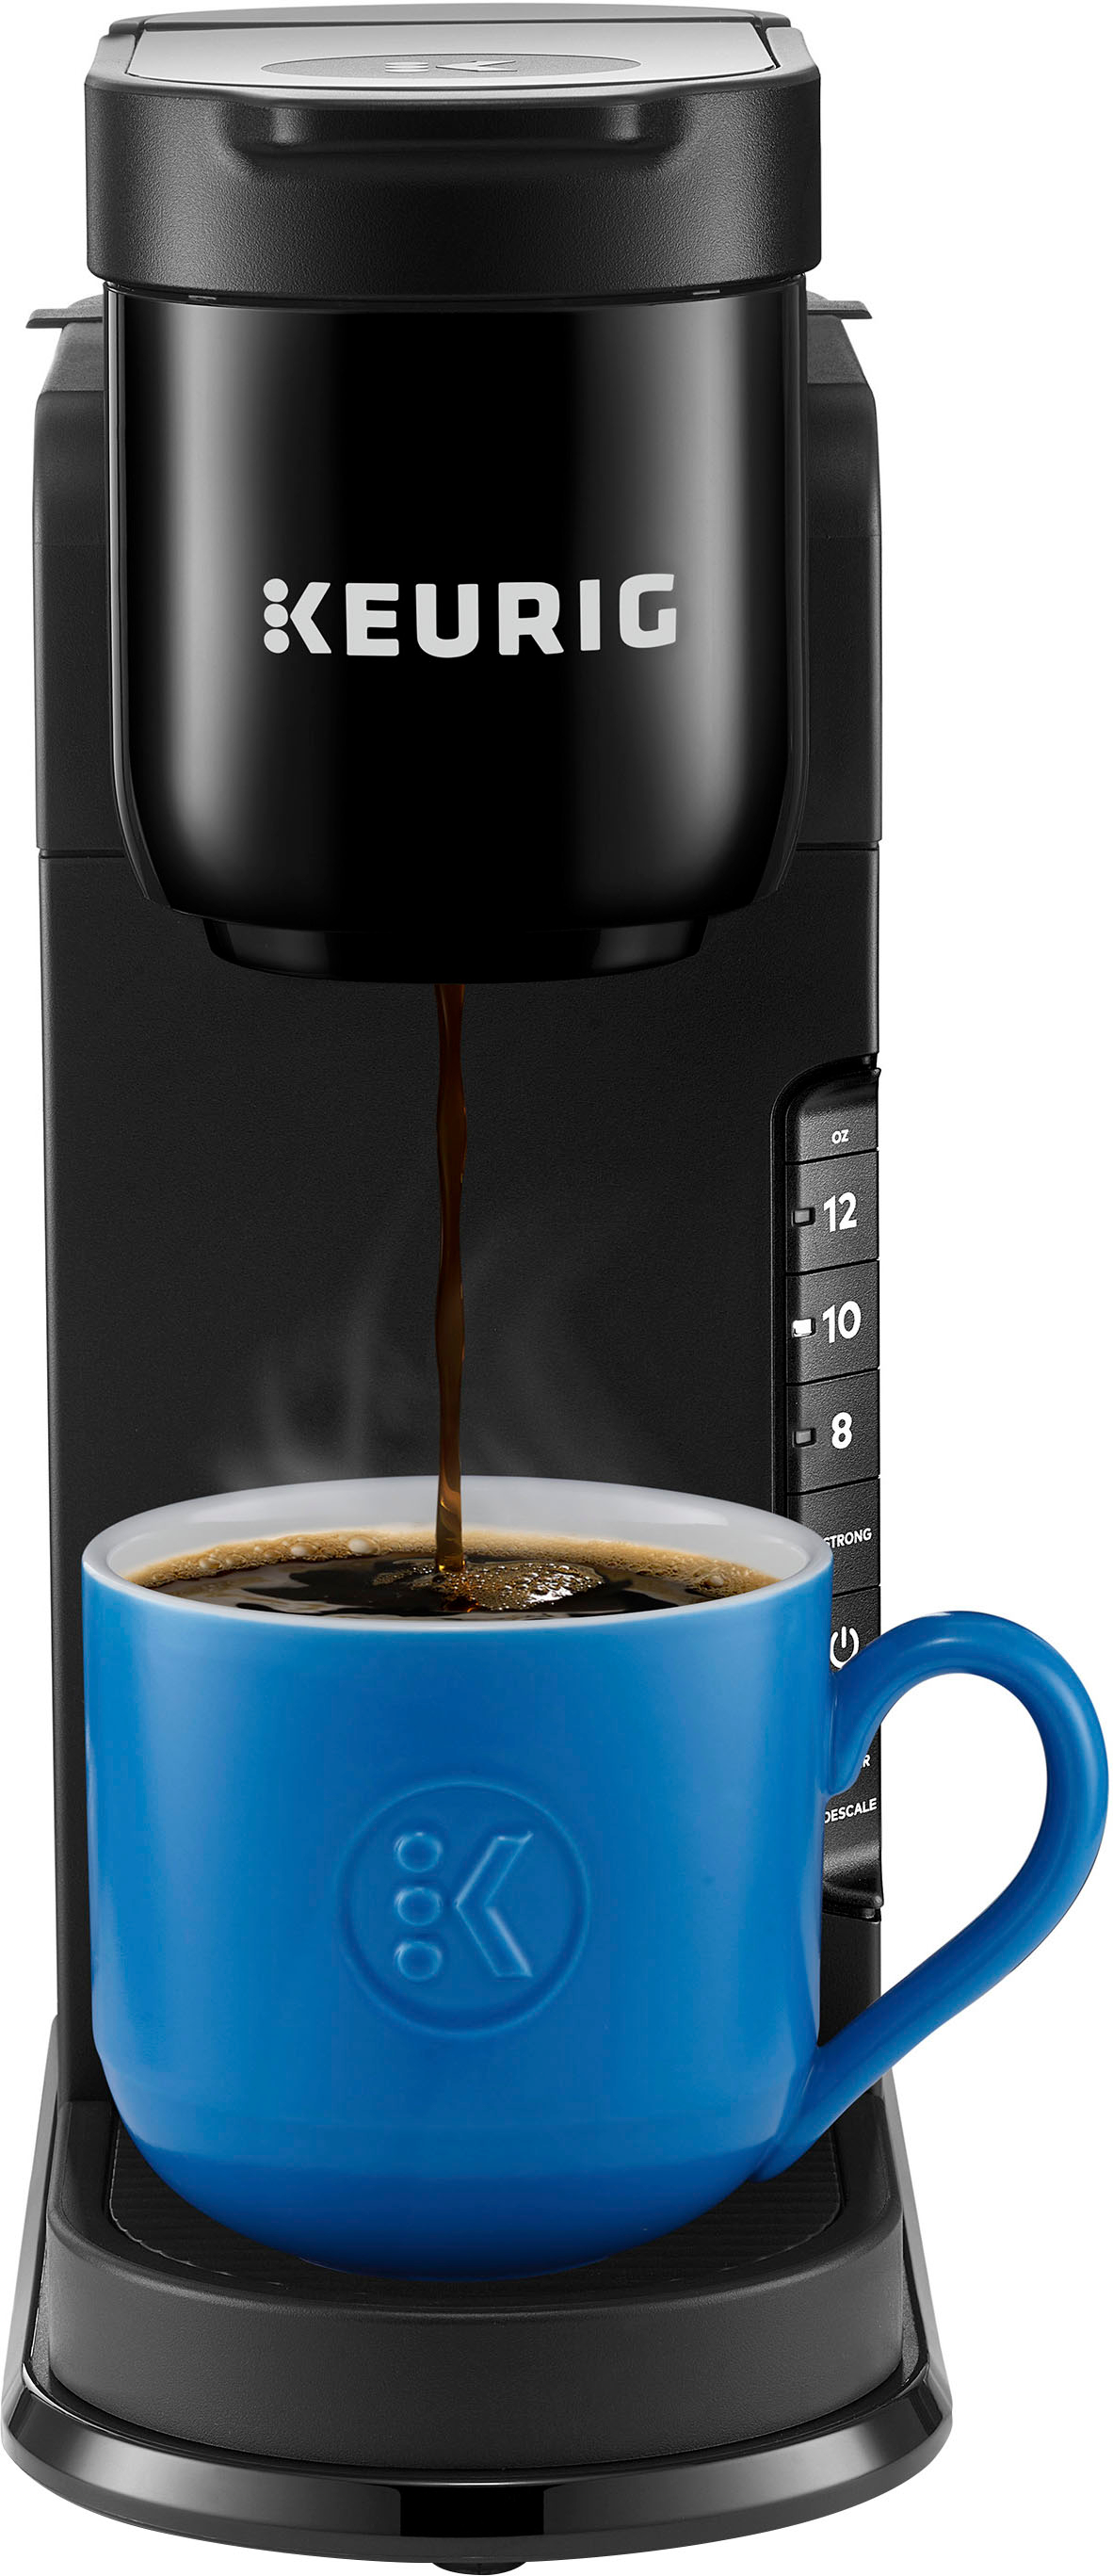 Keurig K-Express Coffee Maker with Bonus Coffeehouse Milk Frother